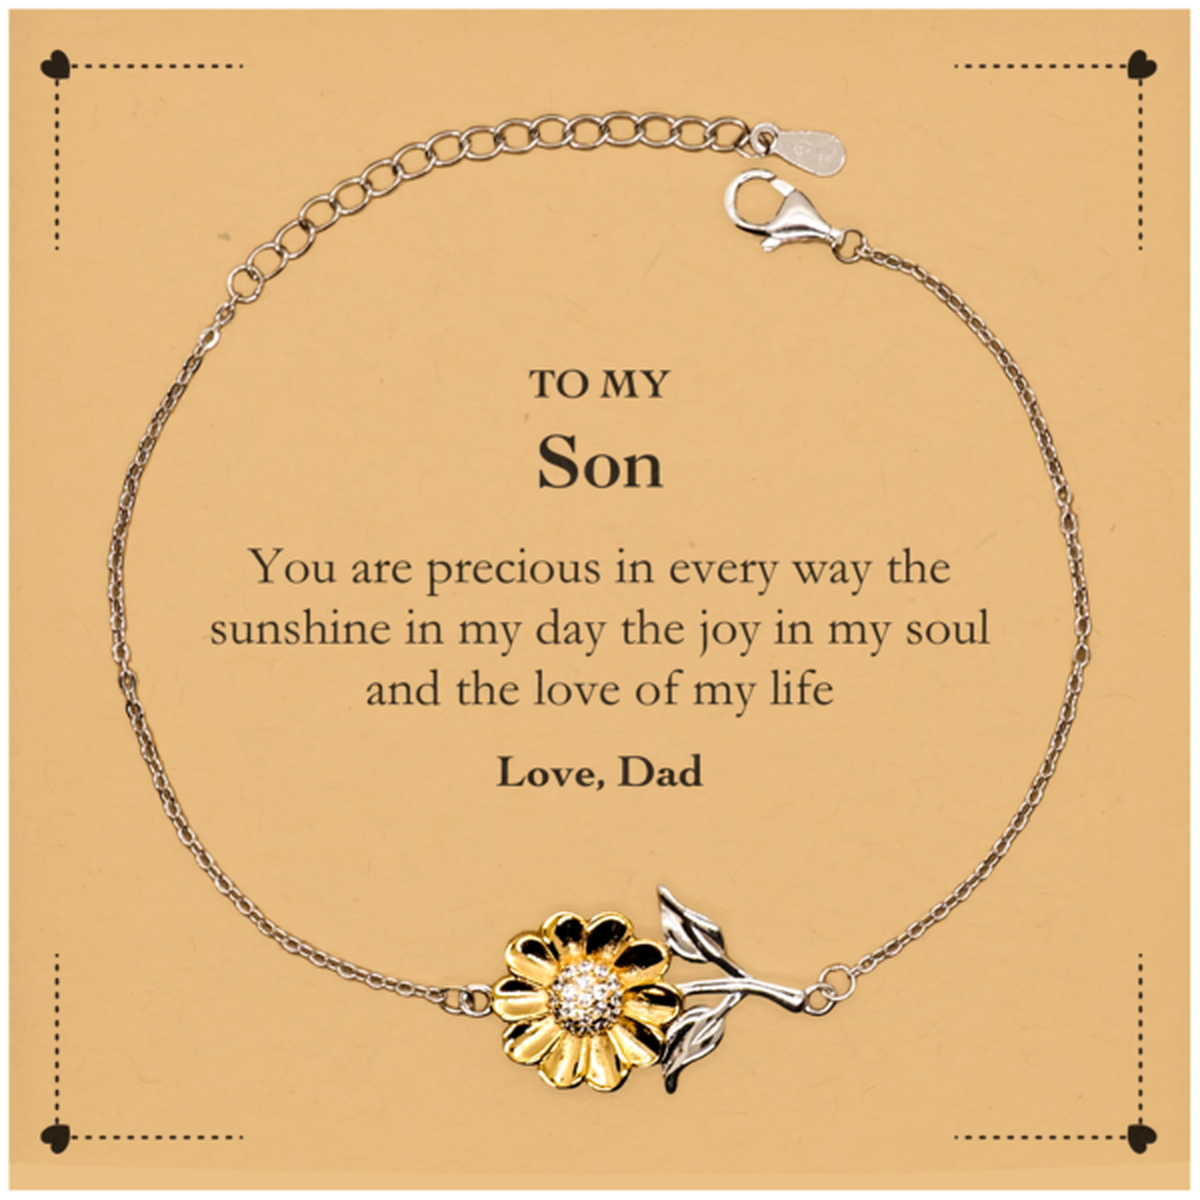 Graduation Gifts for Son Sunflower Bracelet Present from Dad, Christmas Son Birthday Gifts Son You are precious in every way the sunshine in my day. Love, Dad